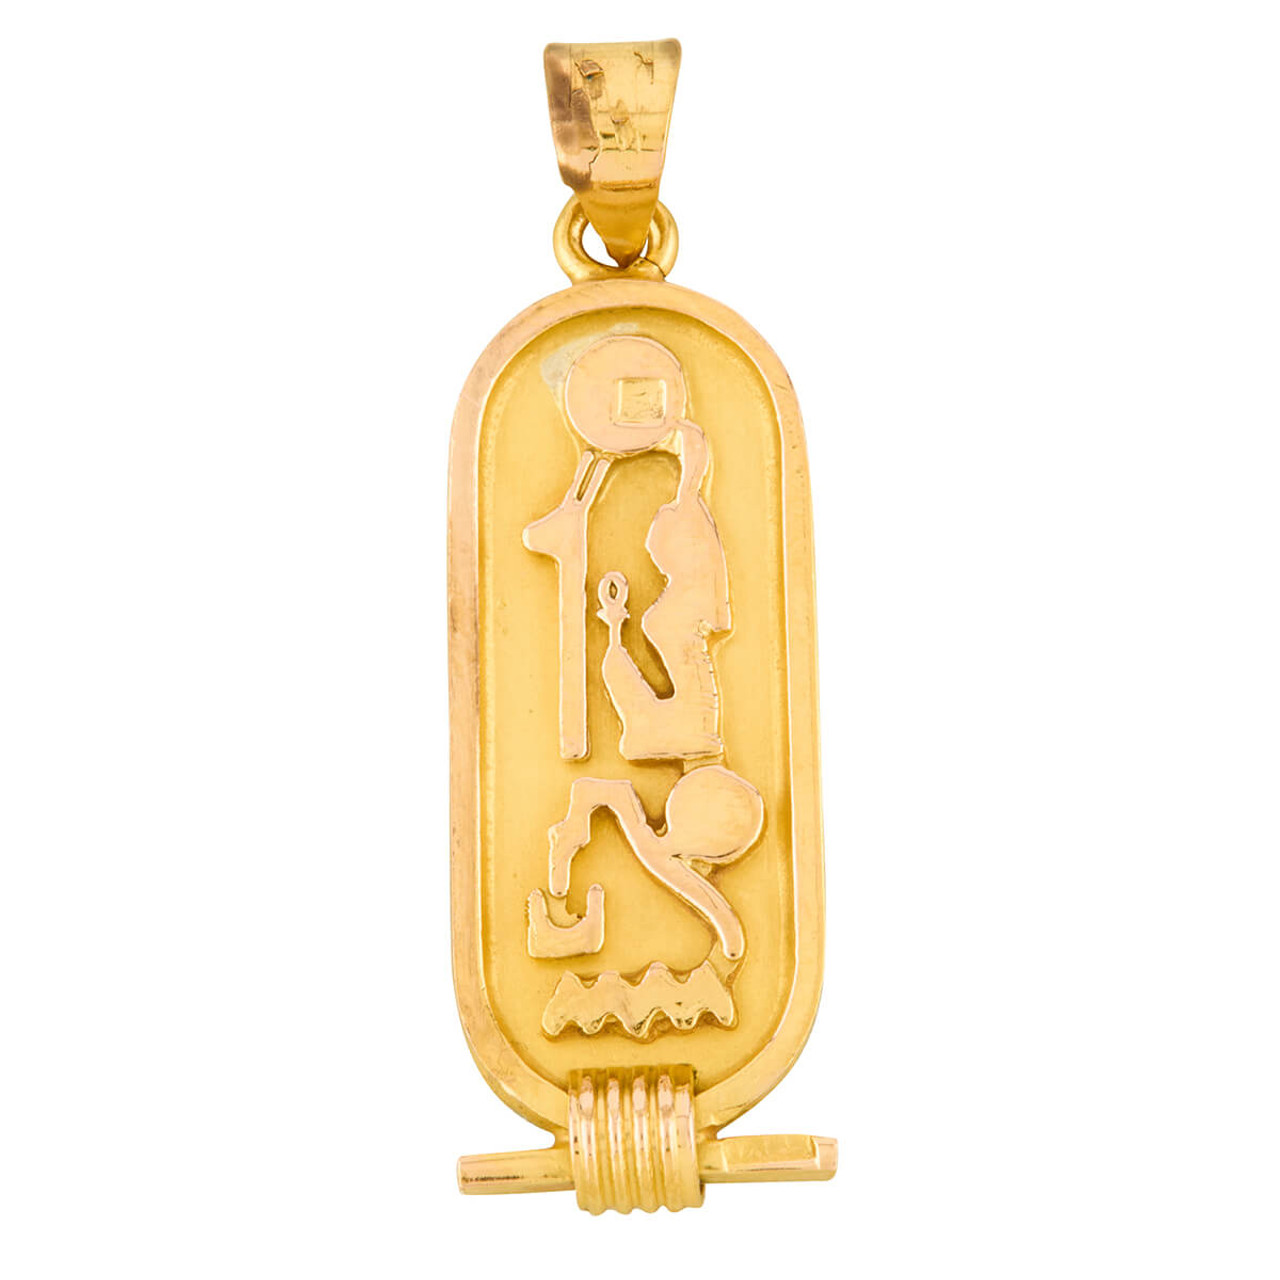 Buy Gold Egyptian Necklace, Eye of Ra, Winged Goddess, Pyramid, Bastet, 24k  Plated Charm Necklace Online in India - Etsy